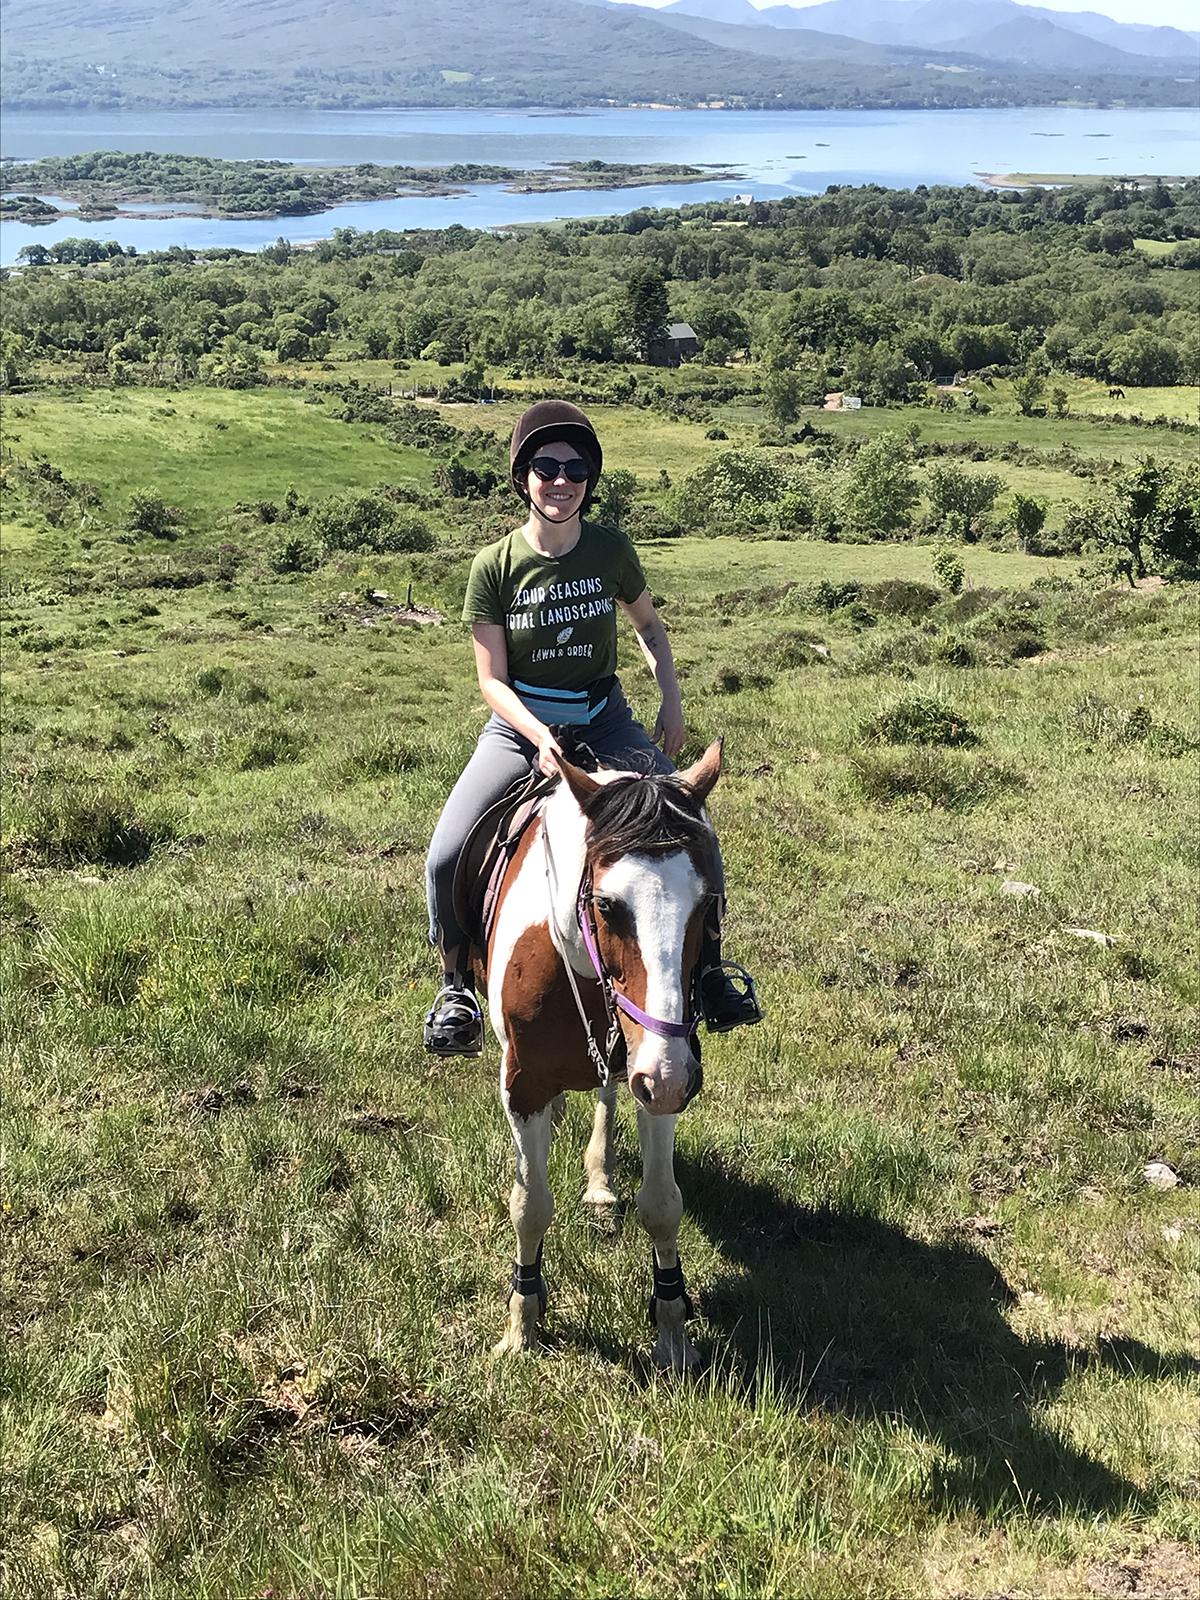 Helen on a horse in the countryside. sea, islands and mountains in background